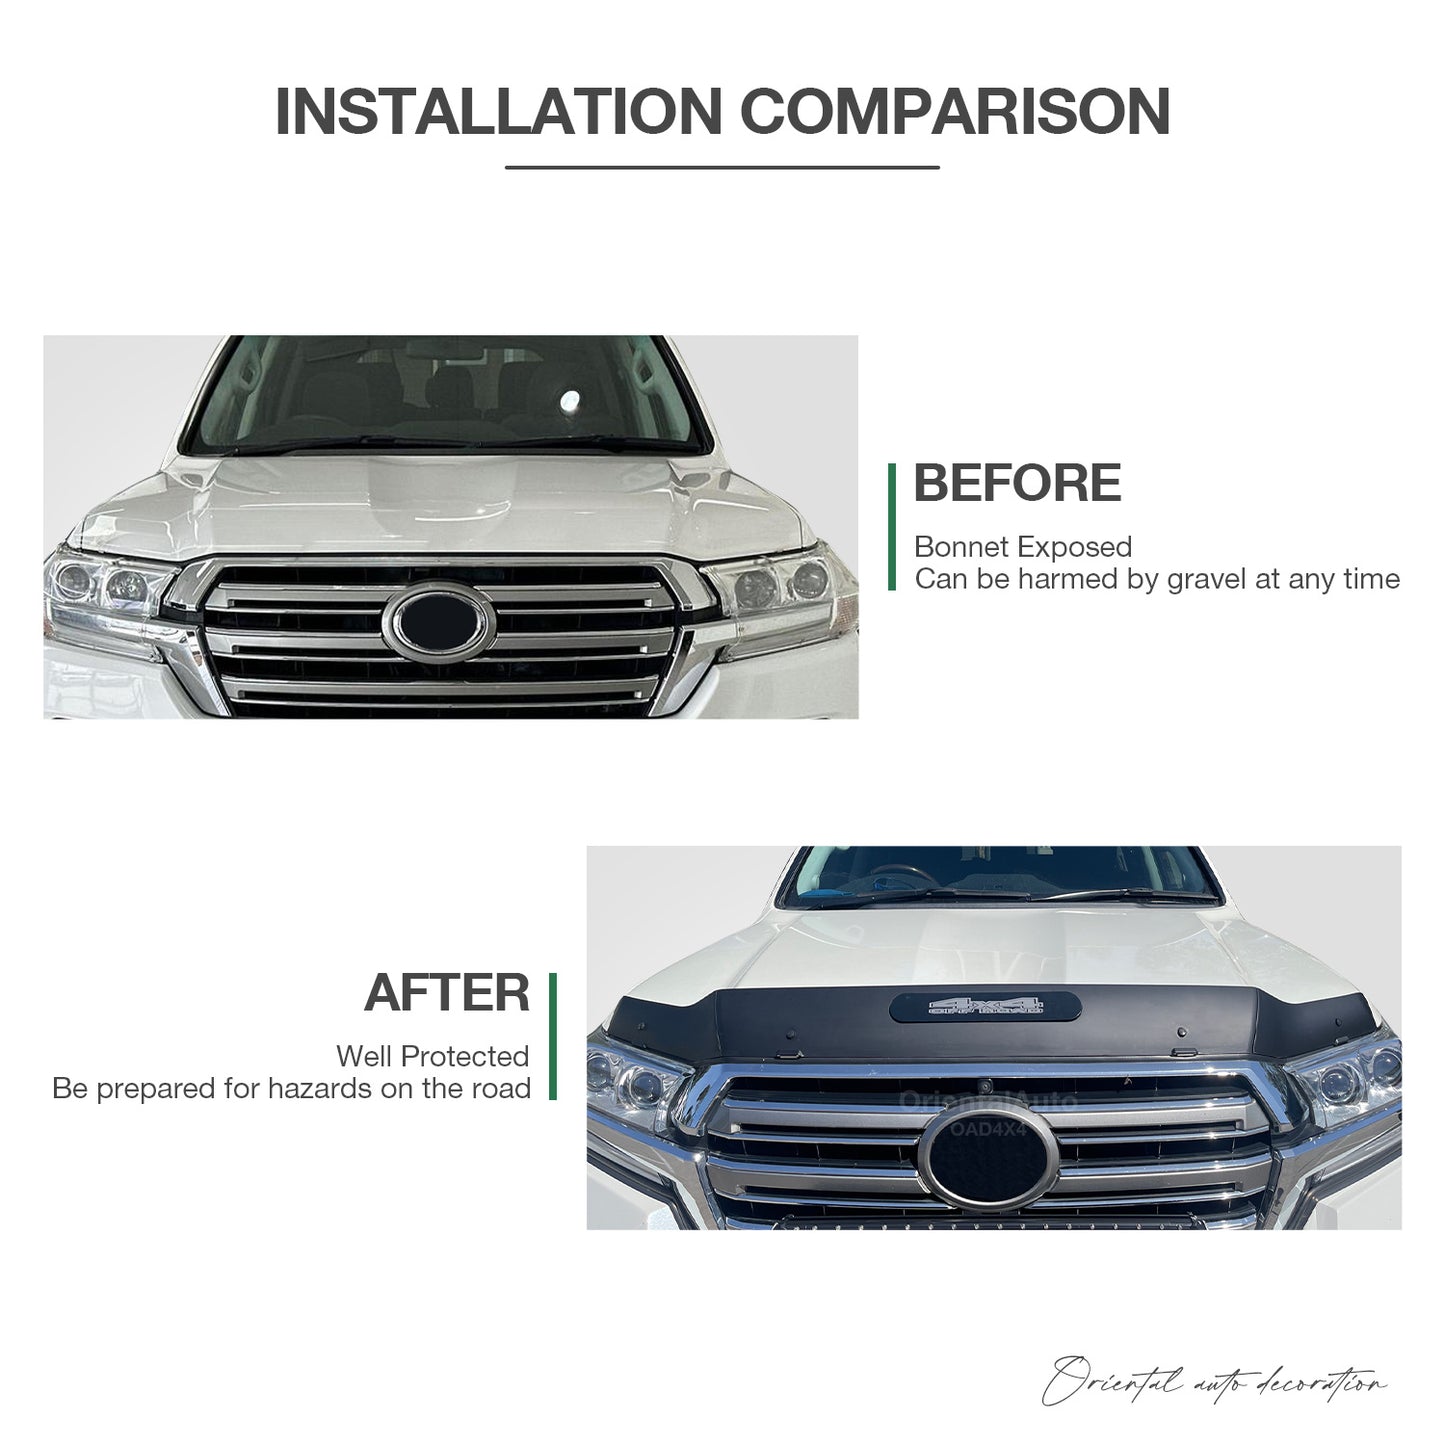 Injection Modeling Exclusive Bonnet Protector Guard for Toyota Landcruiser Land Cruiser 200 LC200 2007-2015 Hood Protector Bonnet Guard